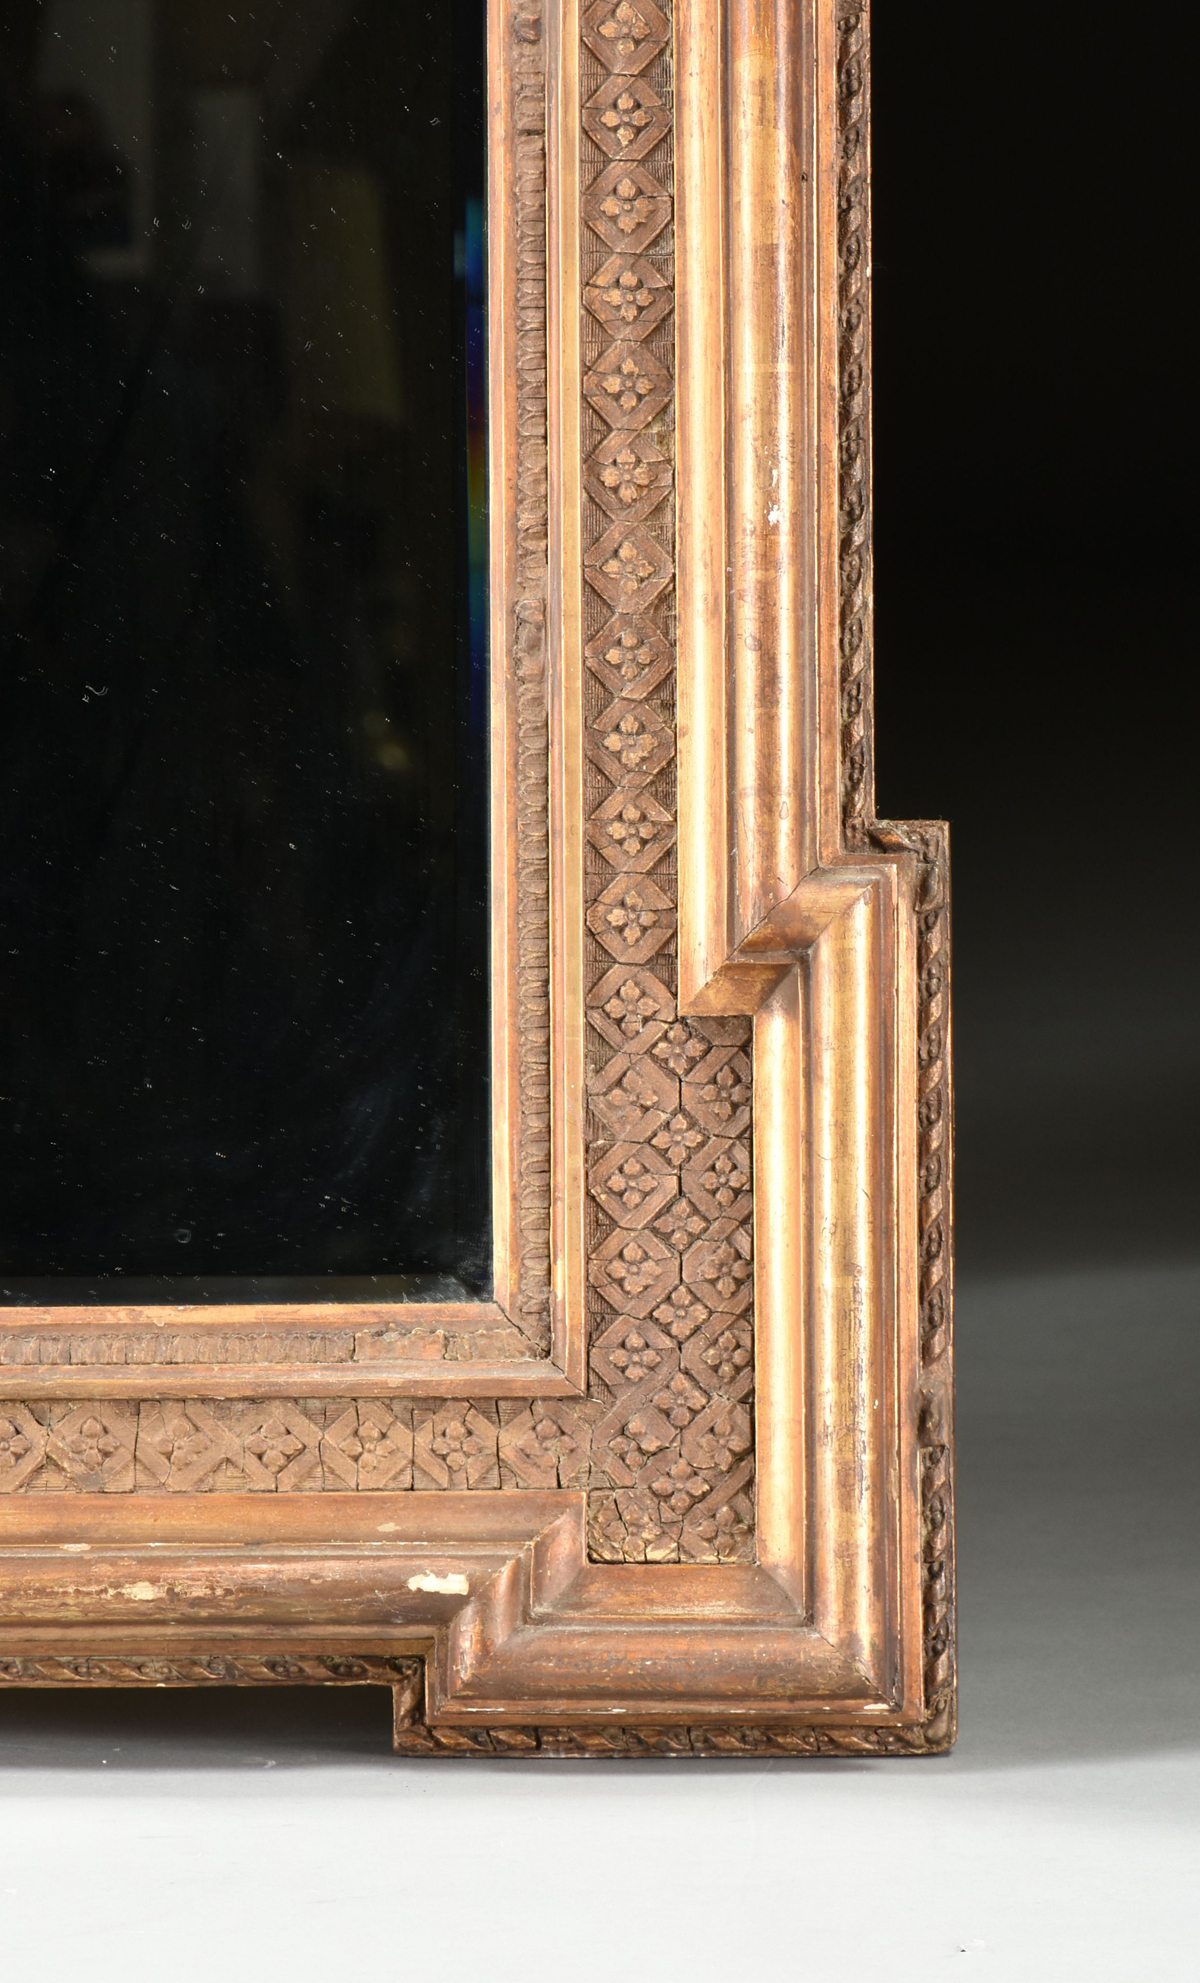 A RENAISSANCE REVIVAL GILT AND CARVED WOOD PIER MIRROR, FRENCH, THIRD QUARTER 19TH CENTURY, with a - Image 4 of 5